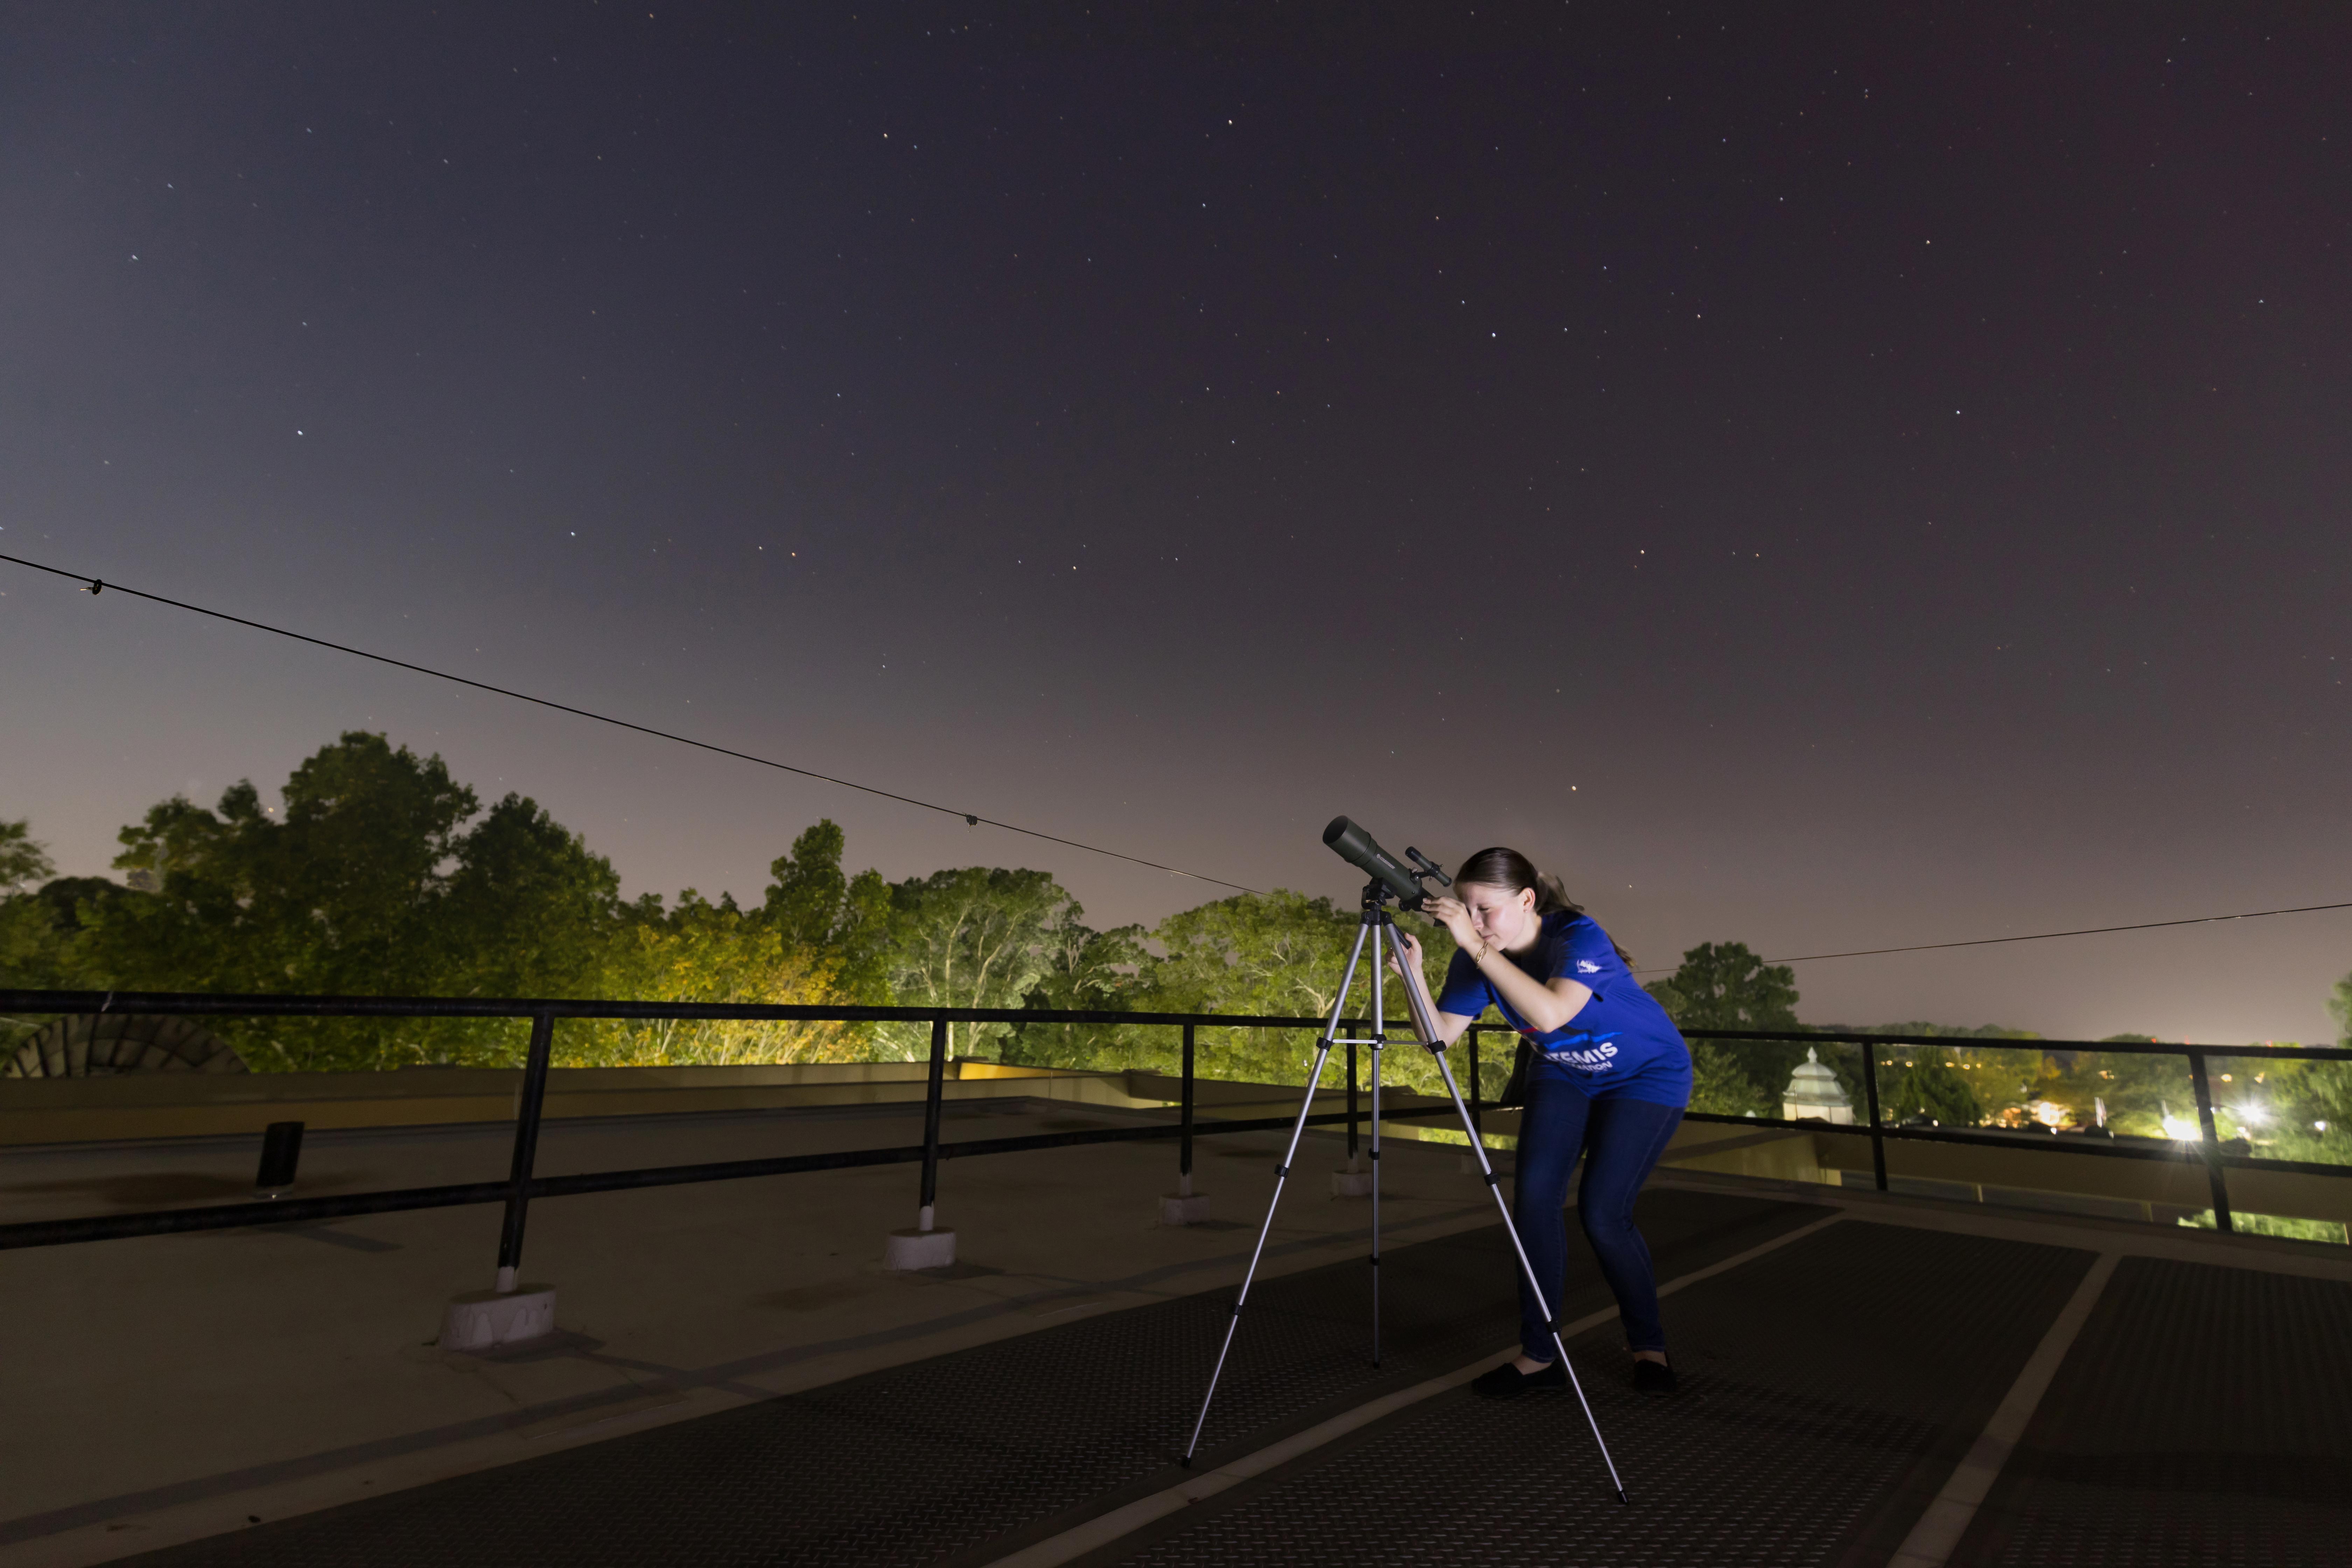 Madeline Schmidt stands outside and looks through a telescope at night.